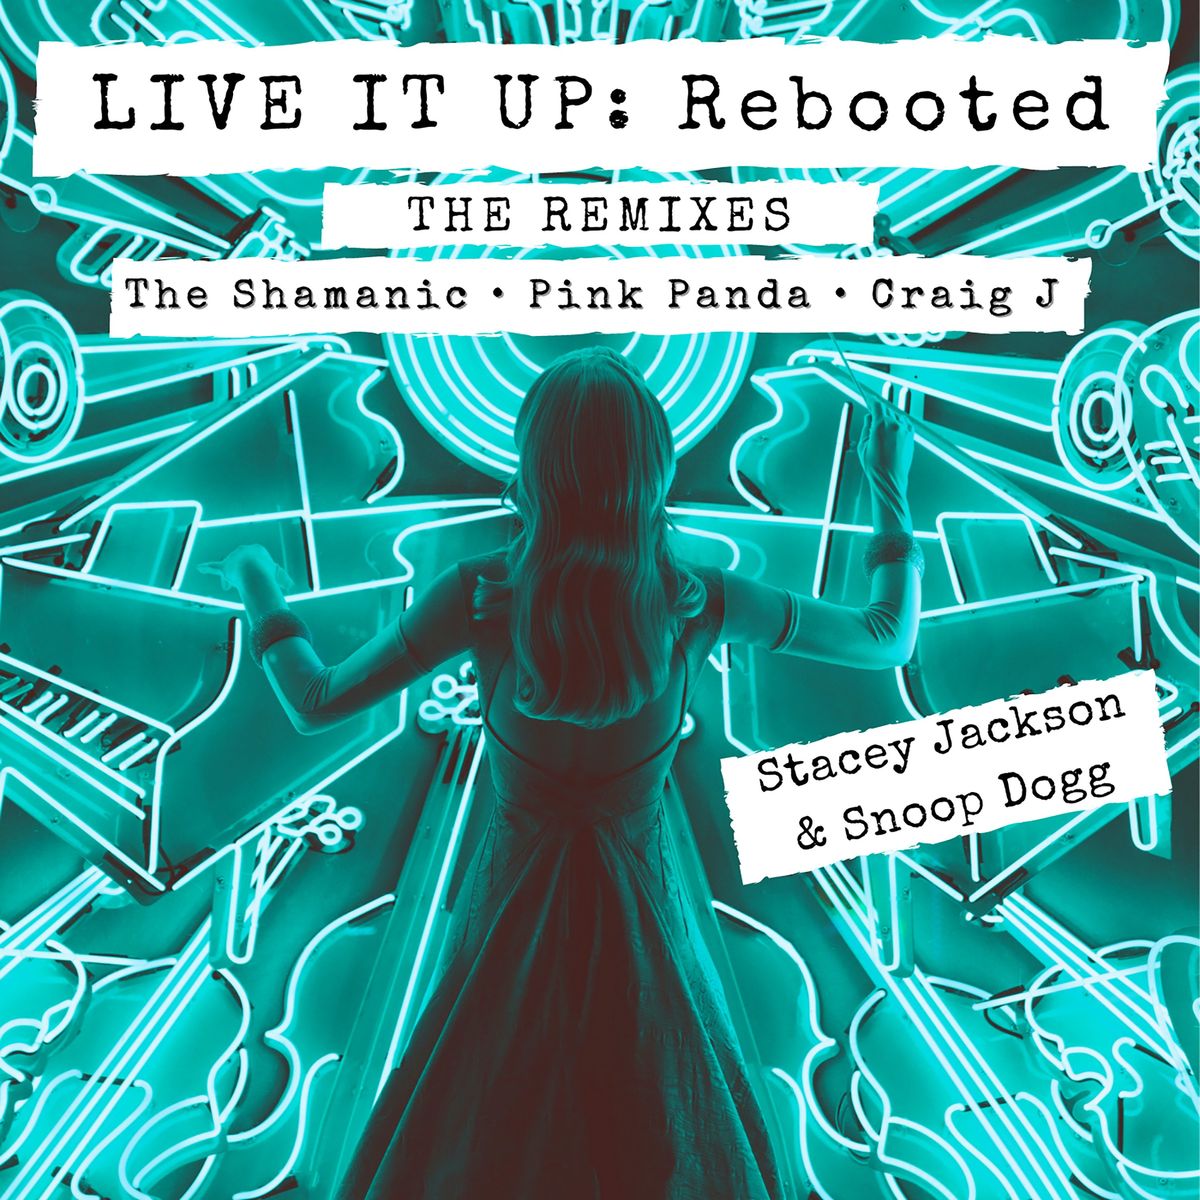 Stacey Jackson ft Snoop Dogg - Live It Up (Rebooted) (The Shamanic Remix)